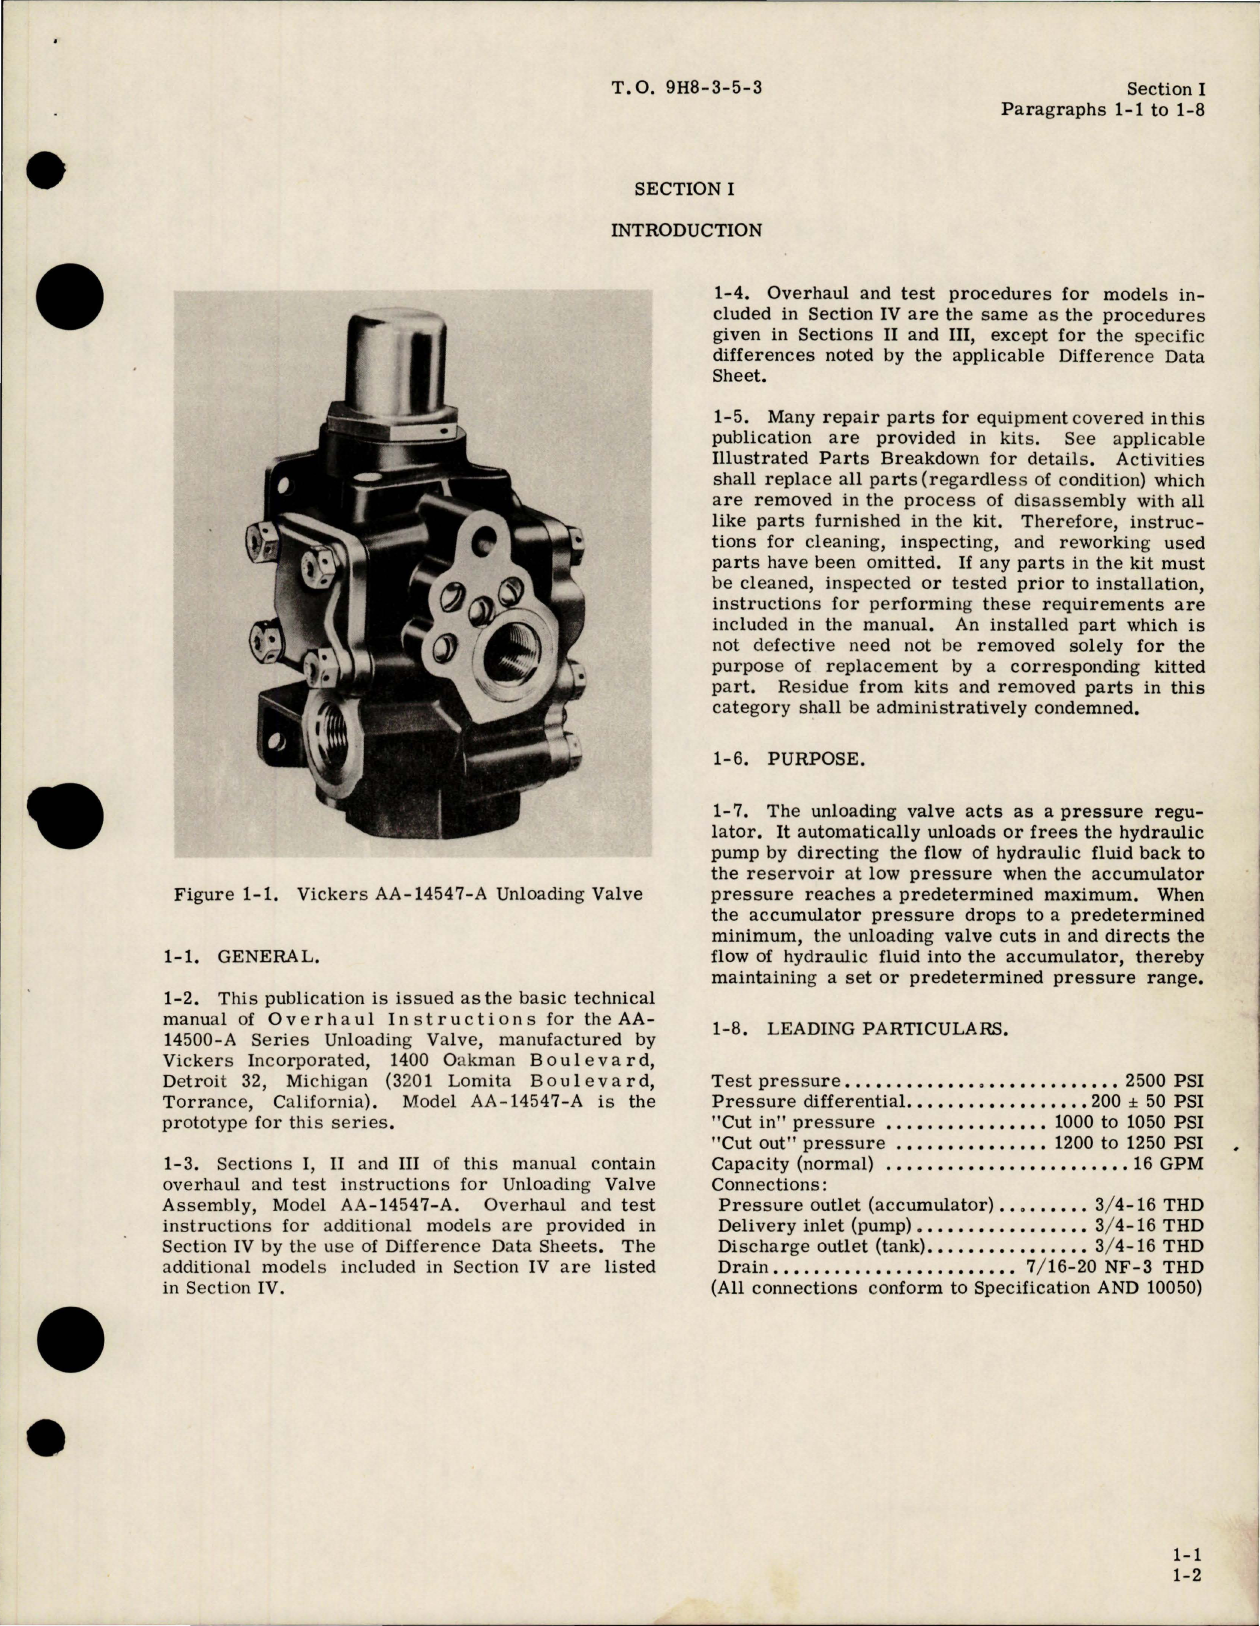 Sample page 5 from AirCorps Library document: Overhaul Instructions for Unloading Valve - AA-14500-A and AA-14500-B Series